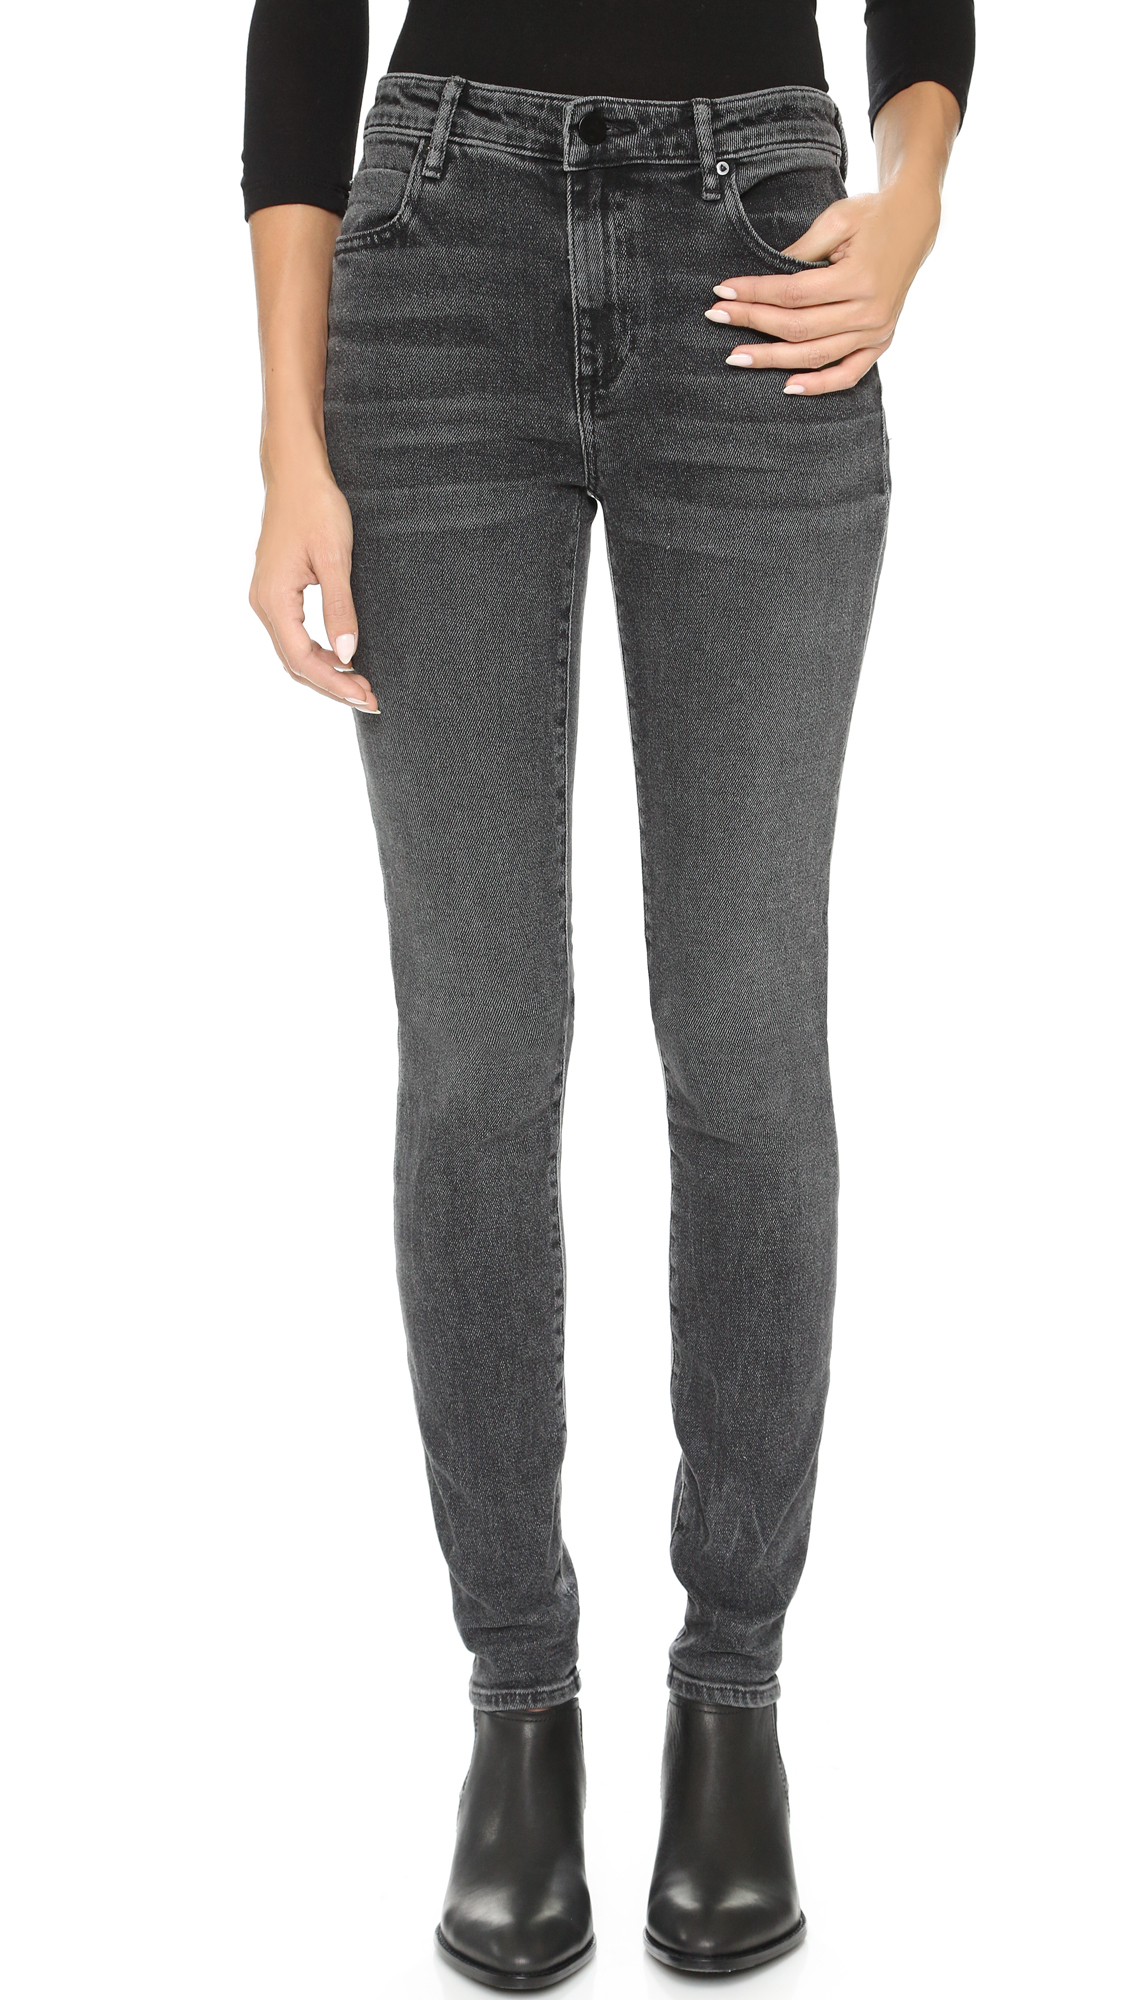 high rise gray jeans